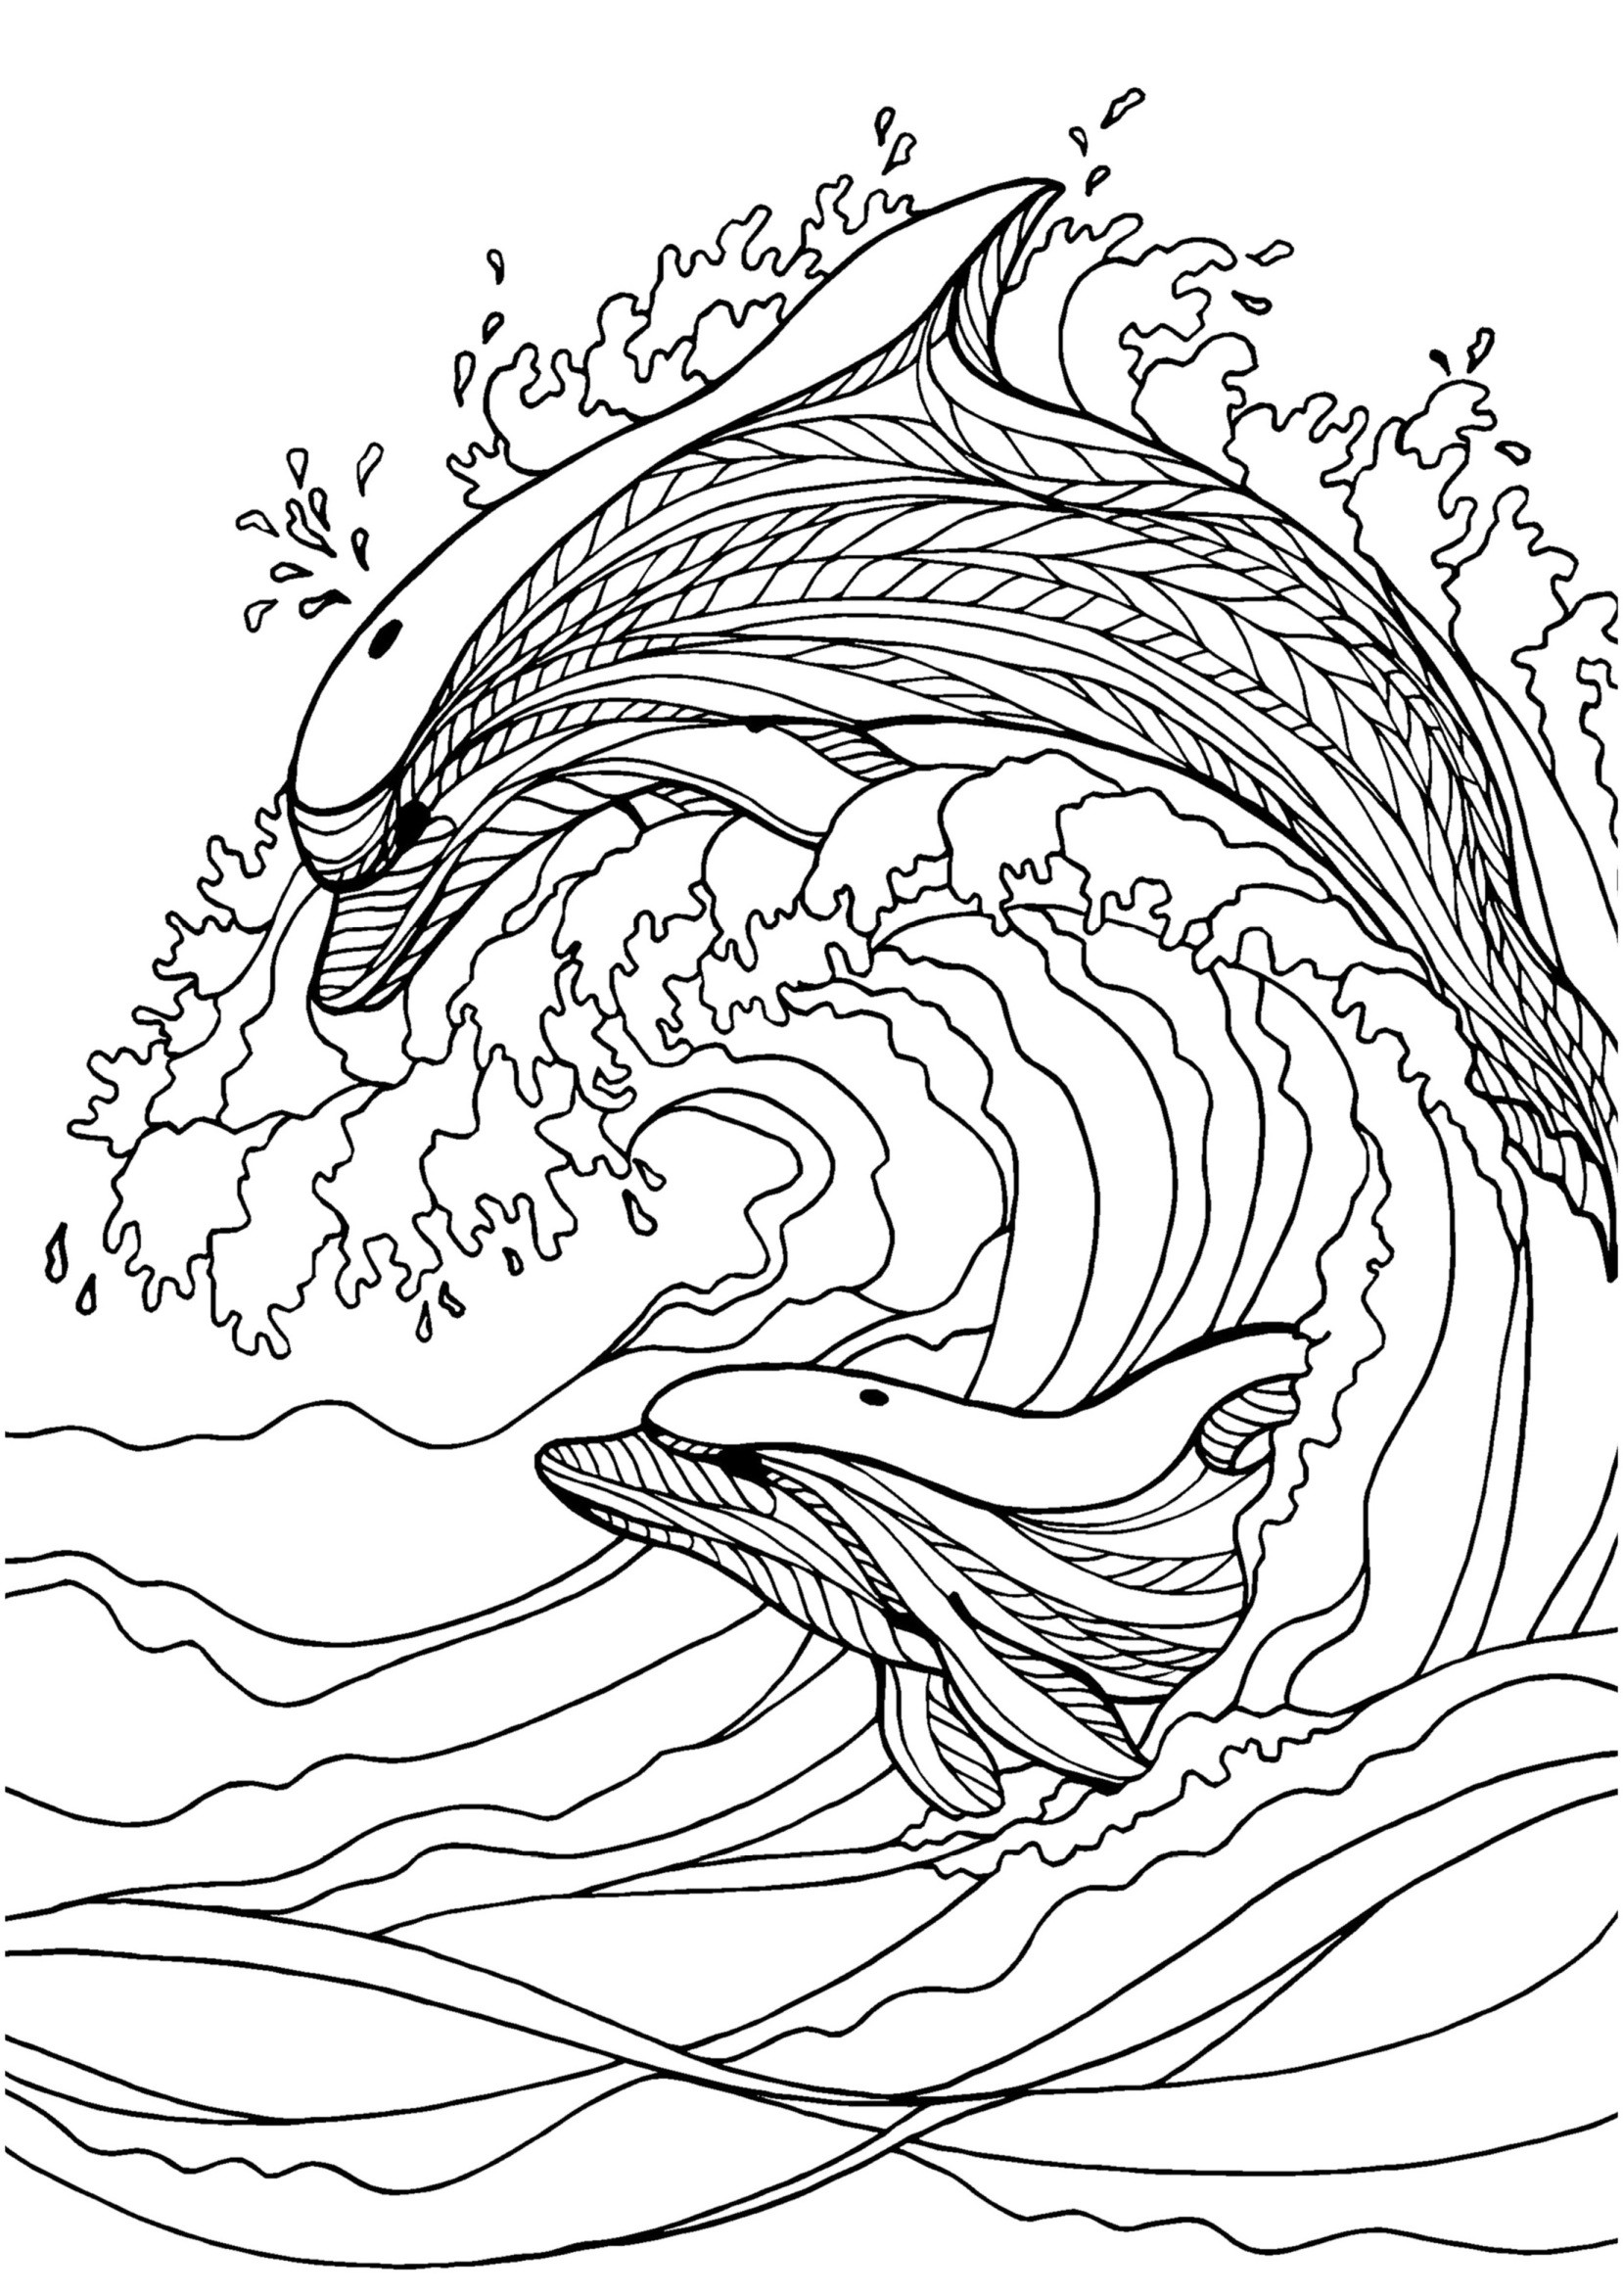 Adult Coloring Pages Dolphin at GetColorings.com | Free ...